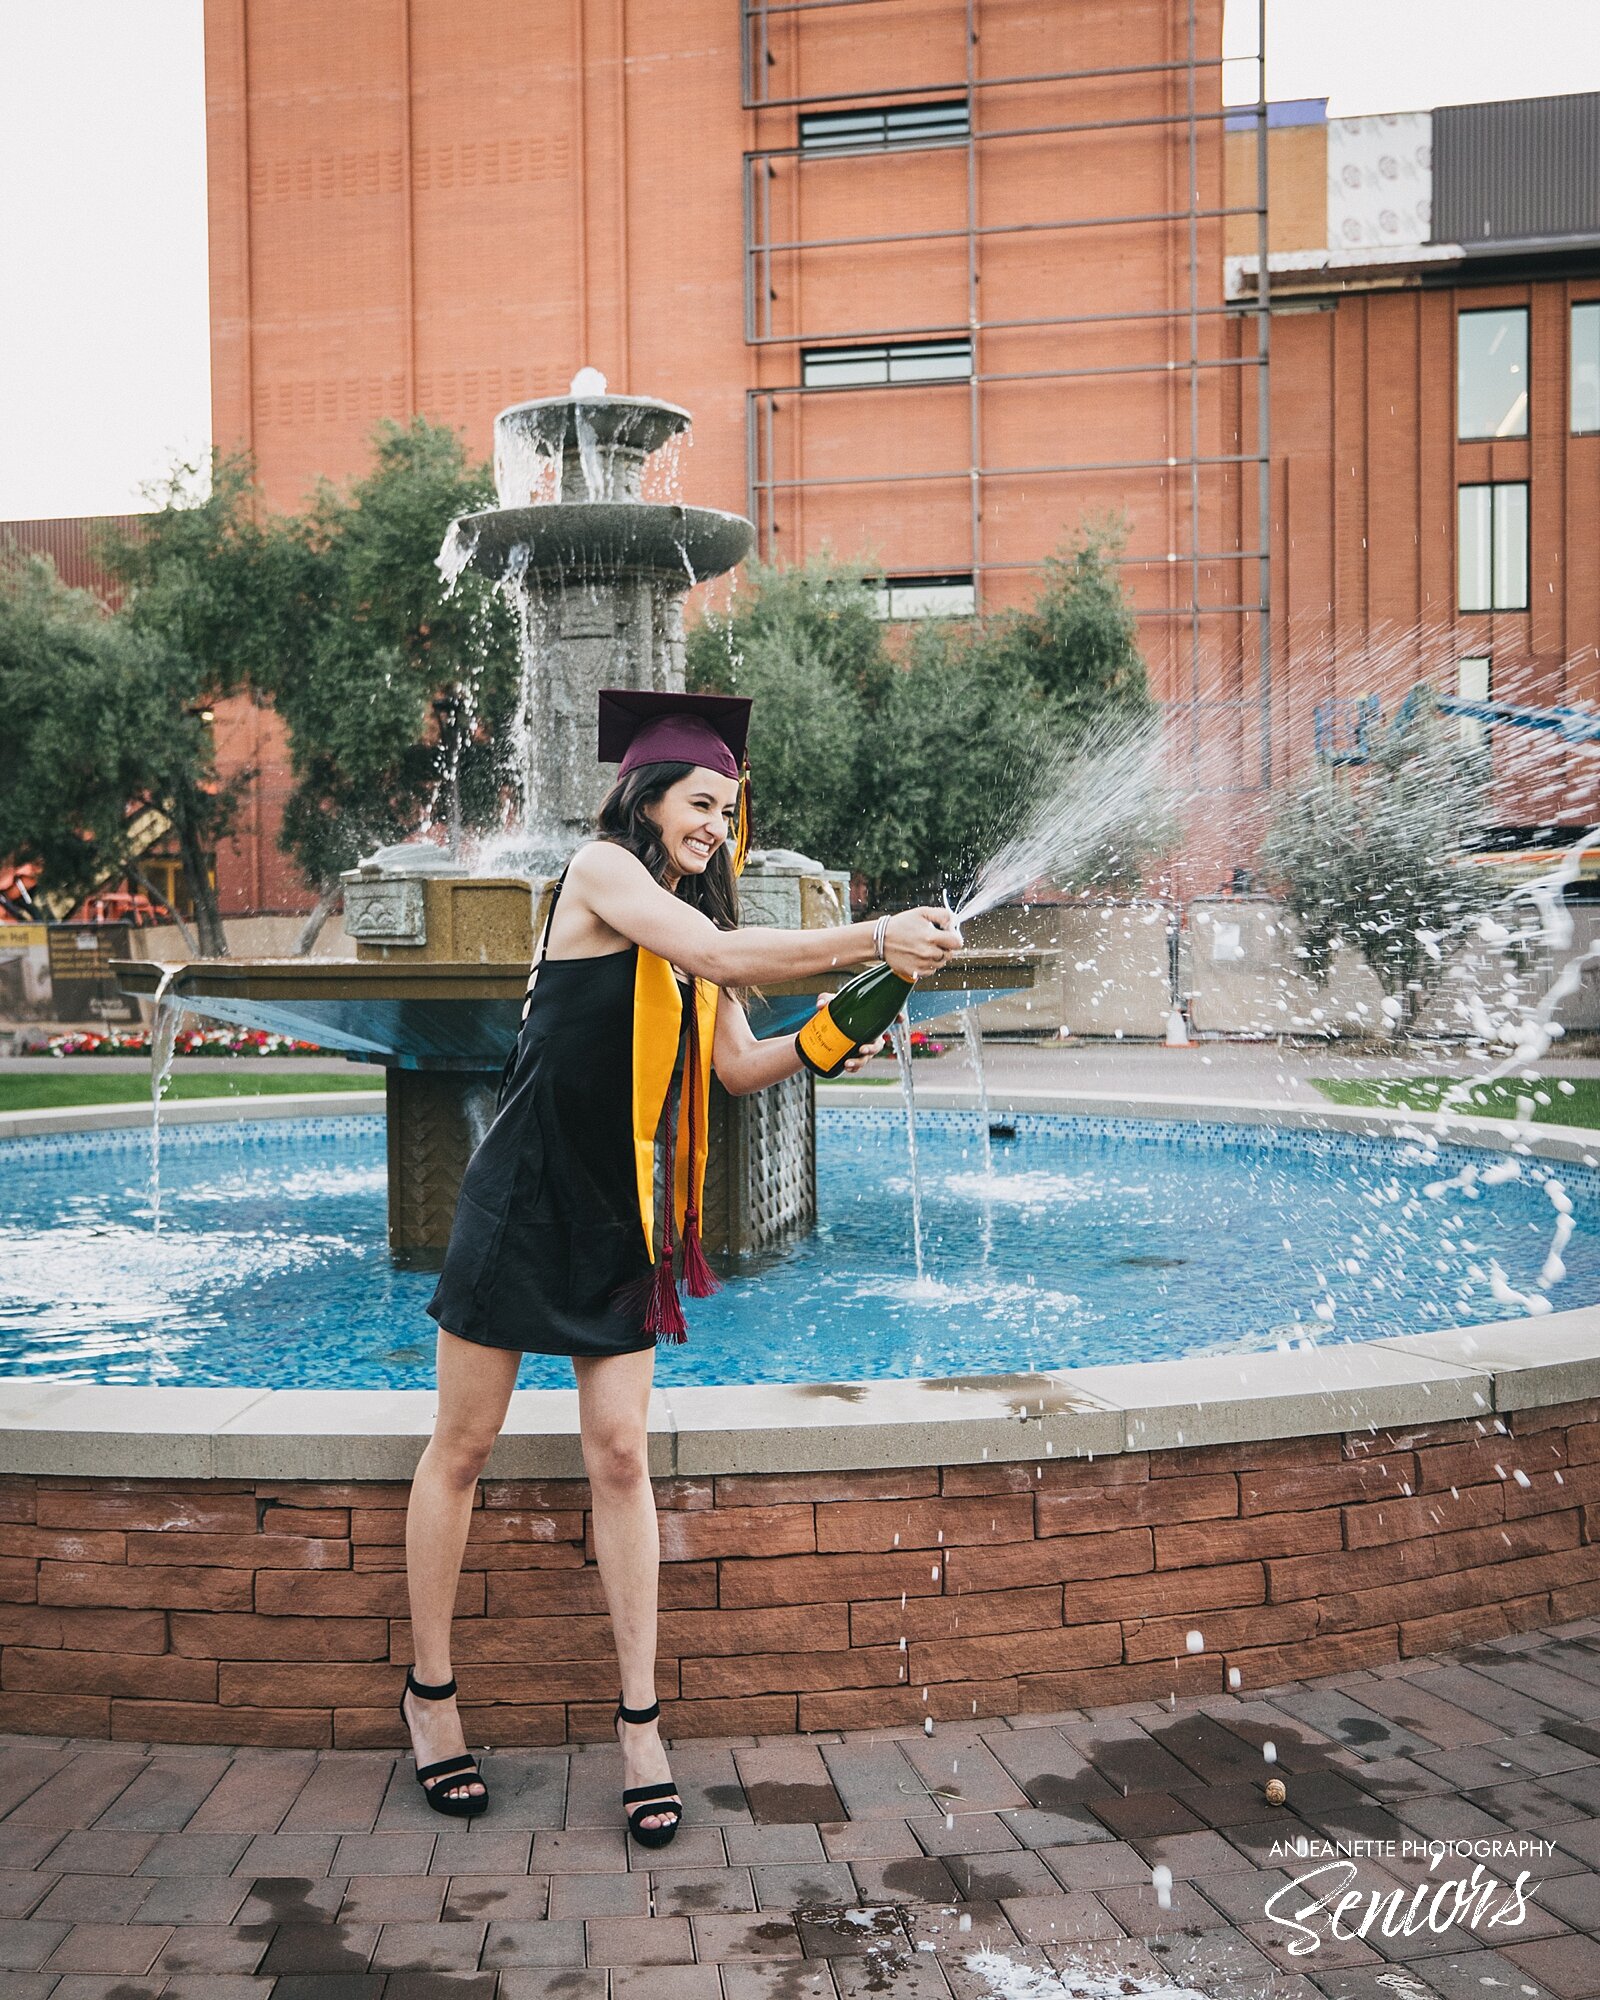 best ASU senior picture Places near me Old Main Phoenix Arizona State University campus to take senior pictures Anjeanette Photography Graduation Picture High School Senior Portraits Peoria 